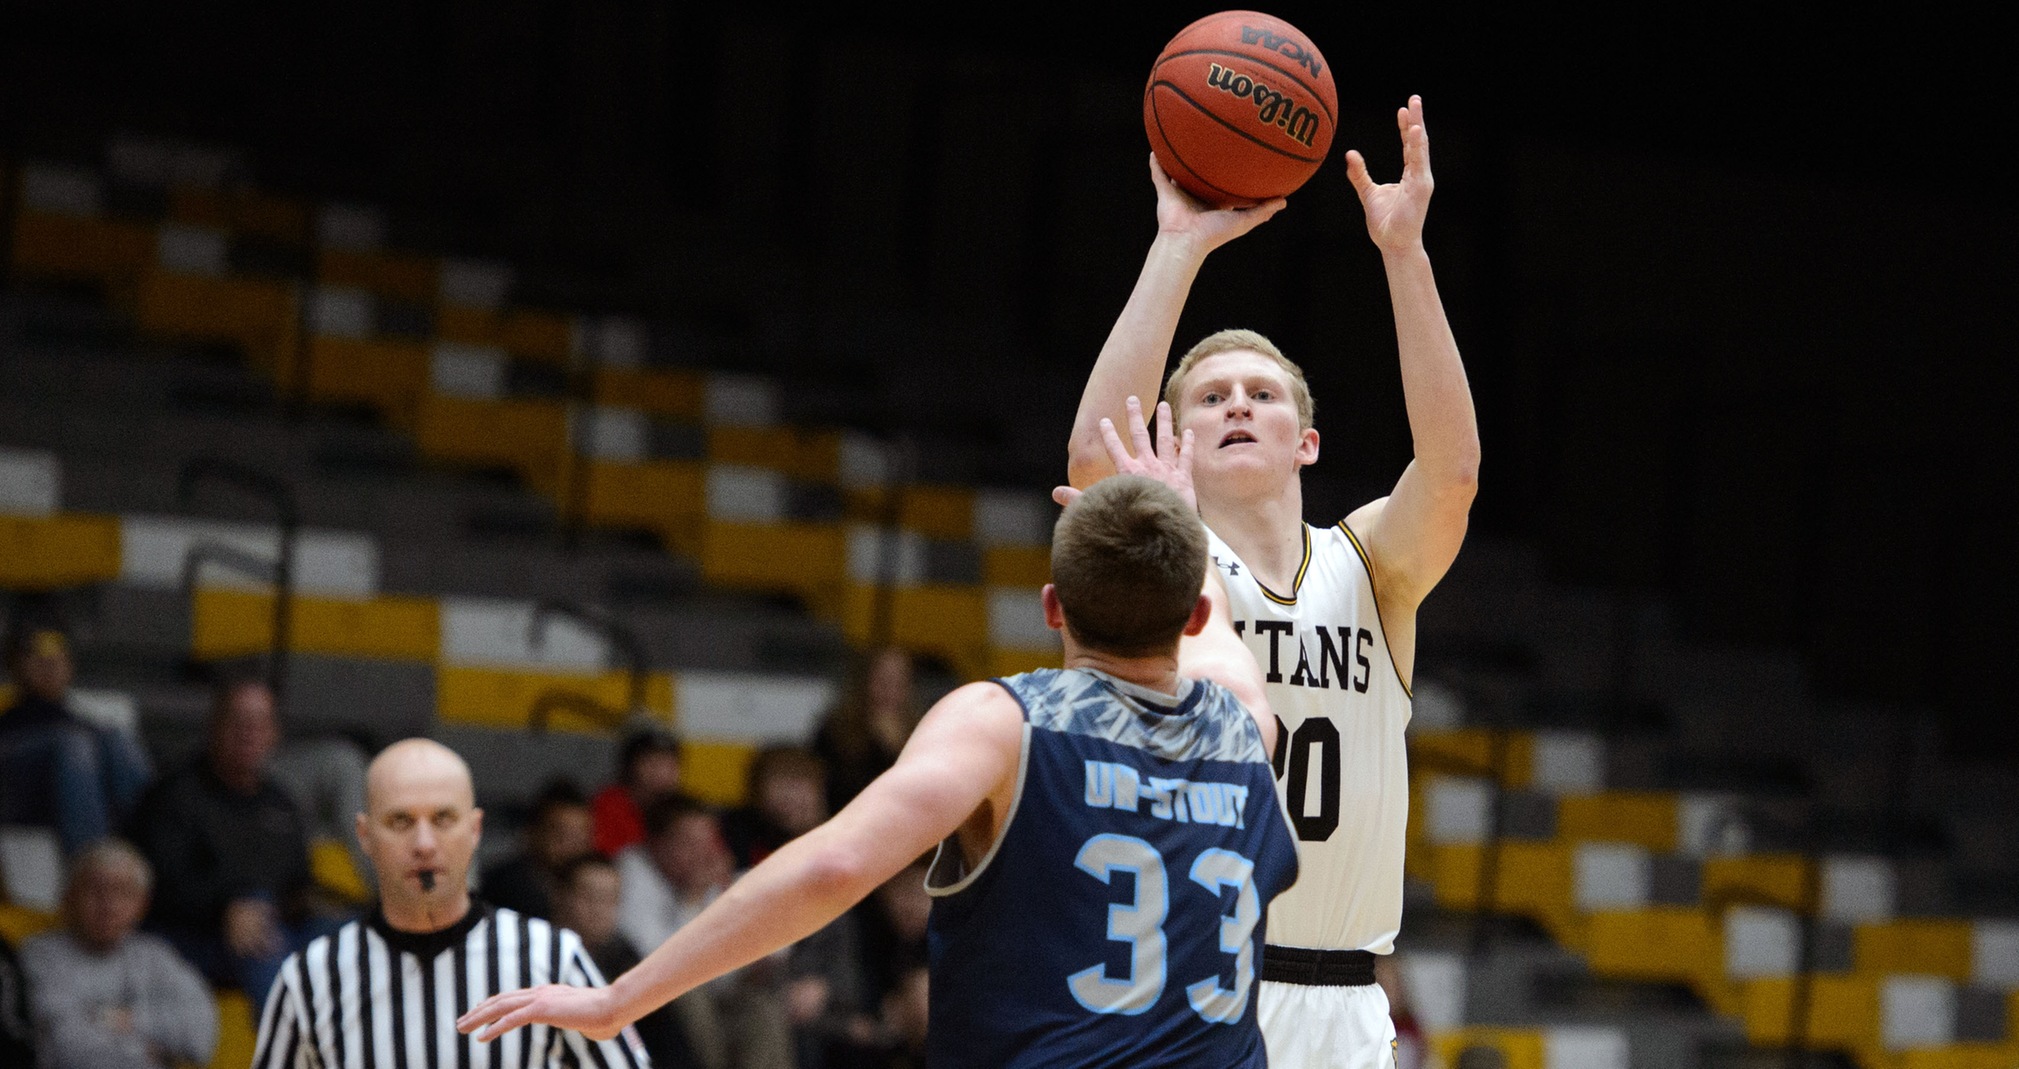 Connor Duax had nine points and three rebounds against the Blue Devils.